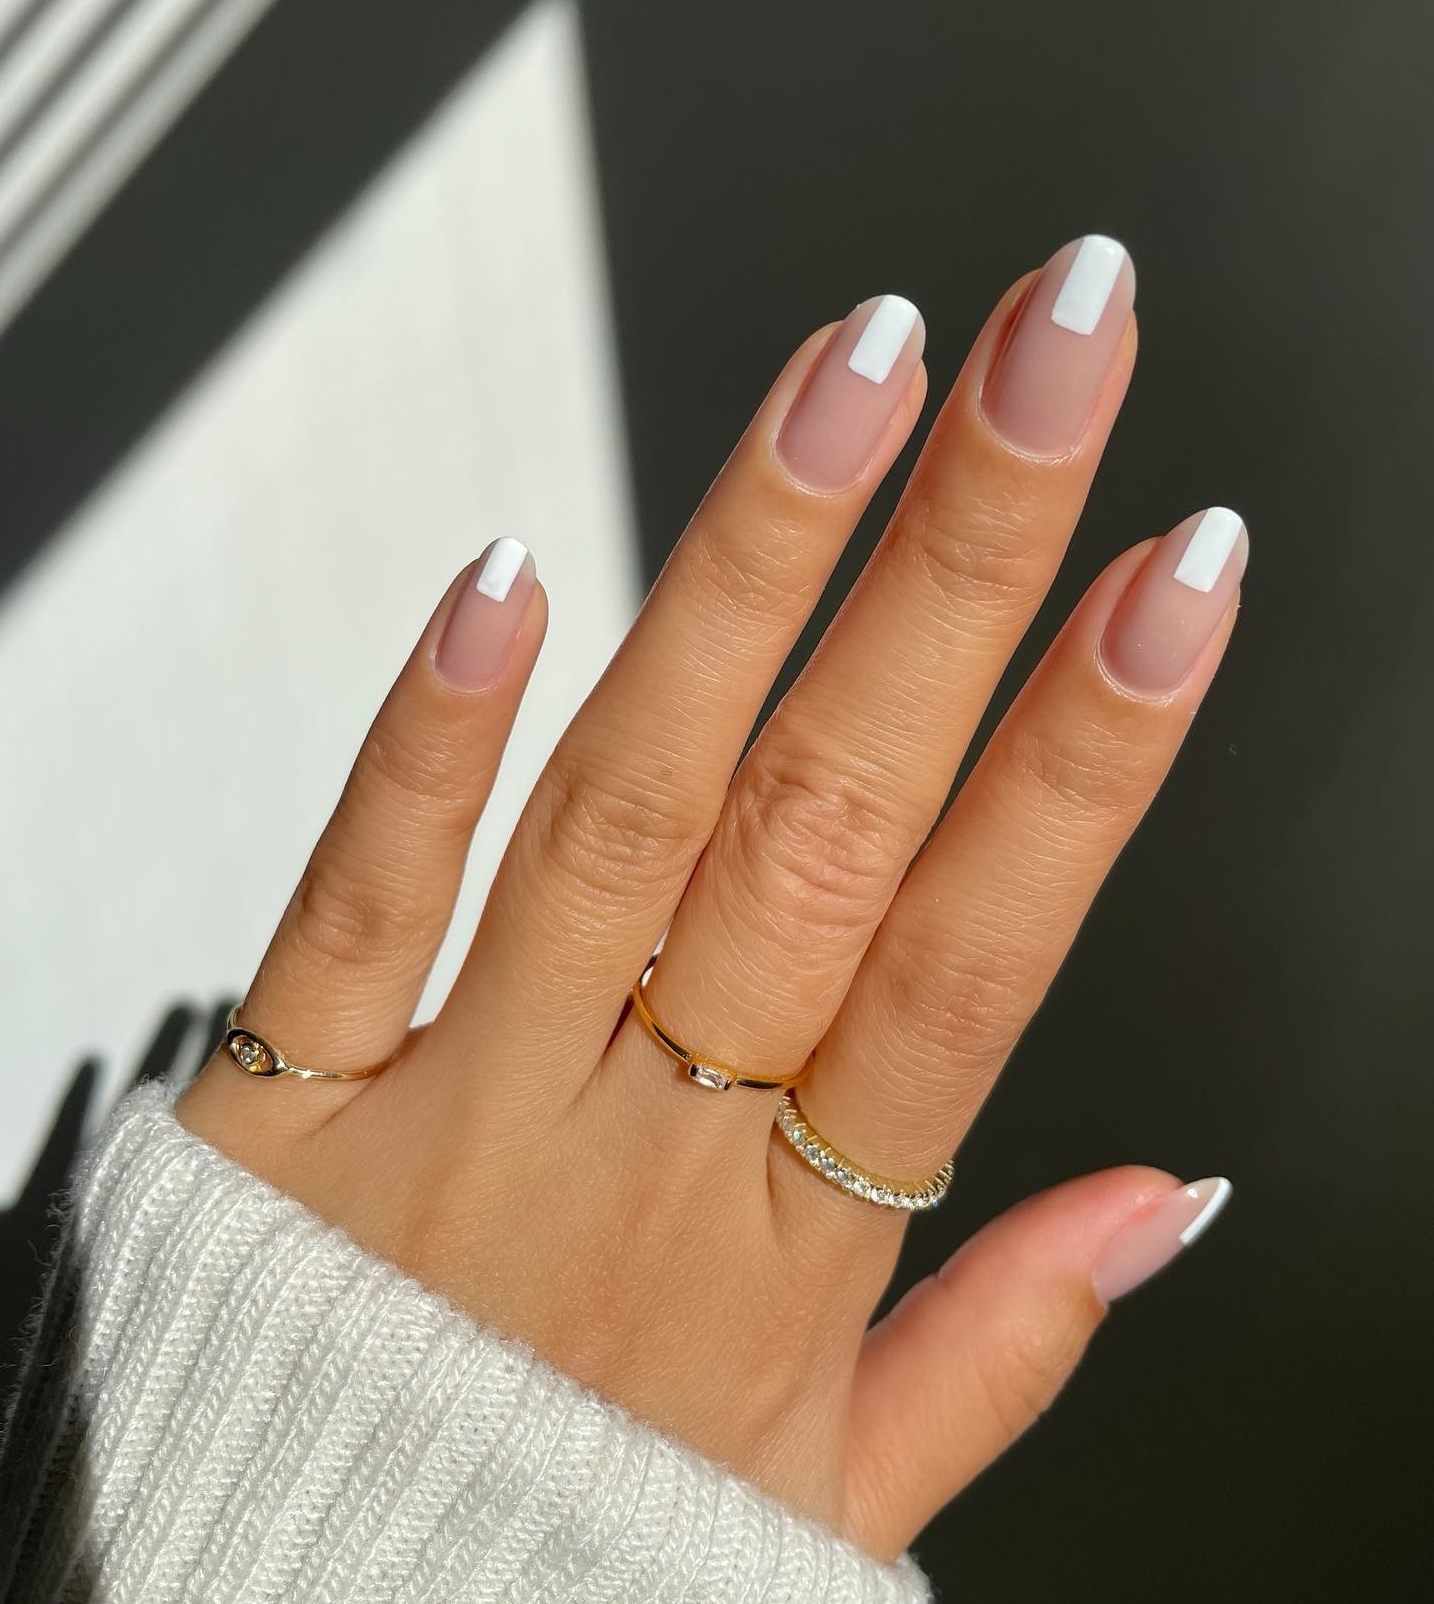 Short Round Clear White Nails